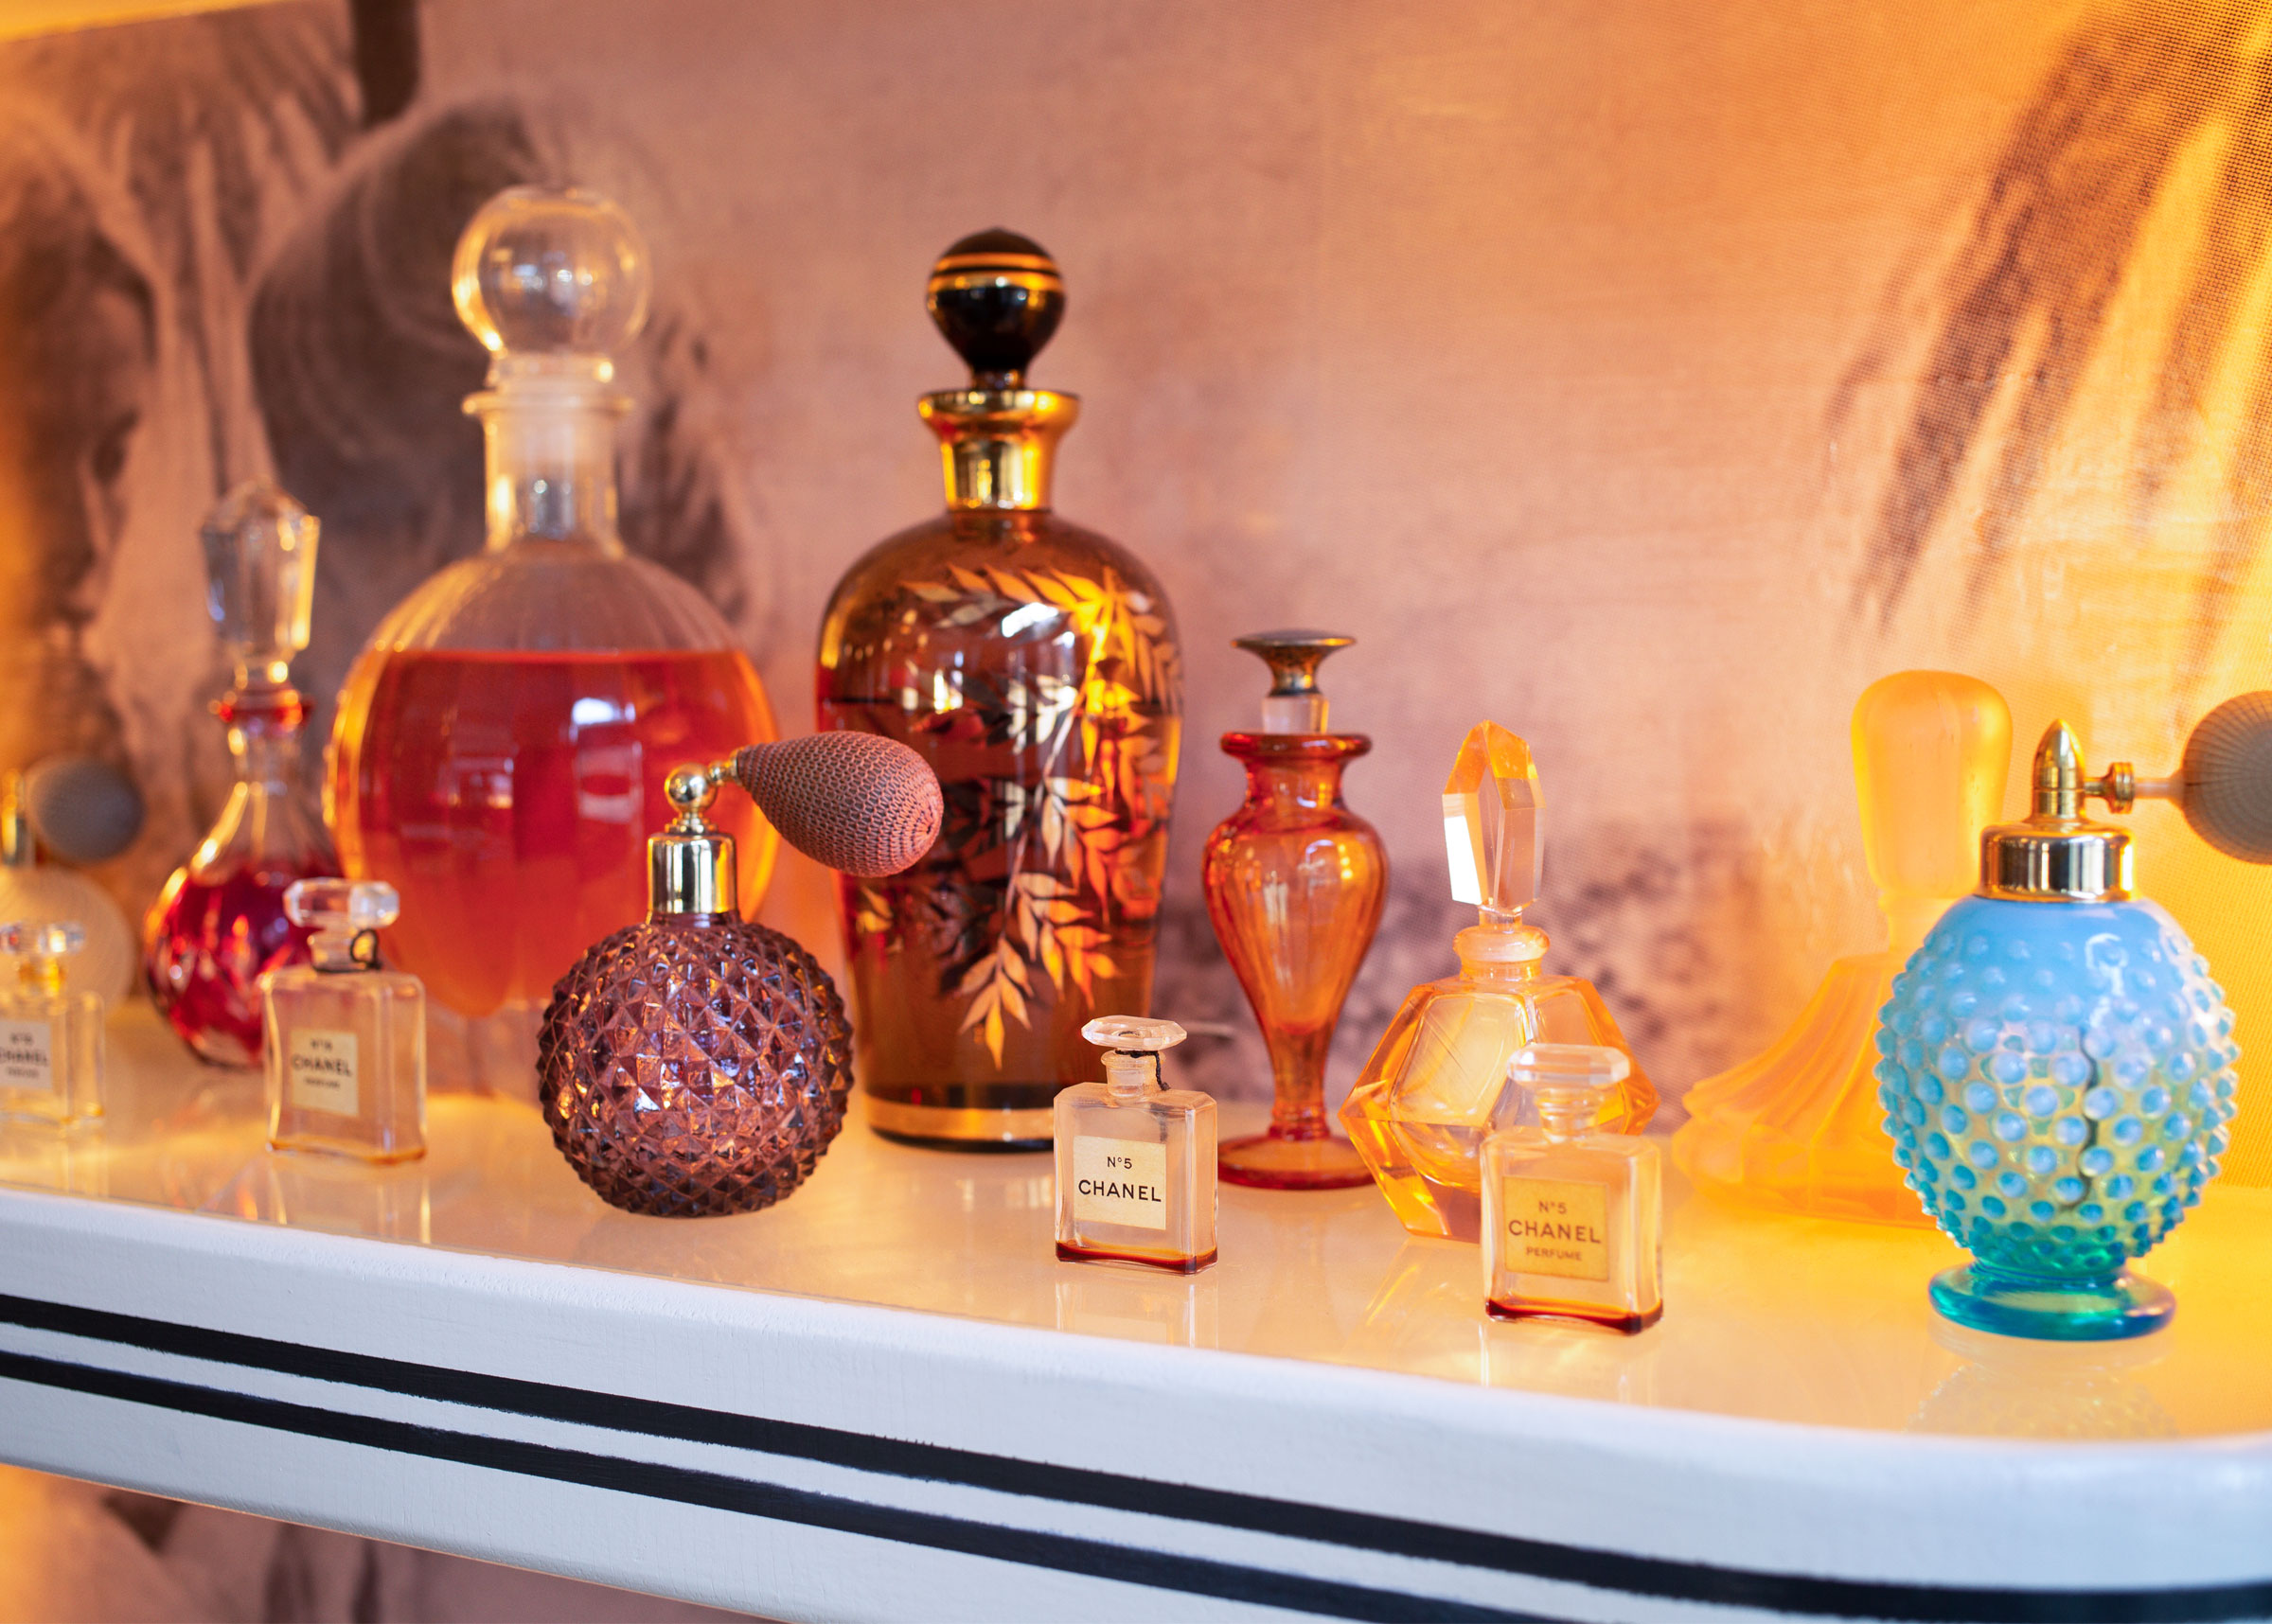 vintage perfume bottles at Chicane restaurant in soho Manhattan New York featuring Chanel Number 5